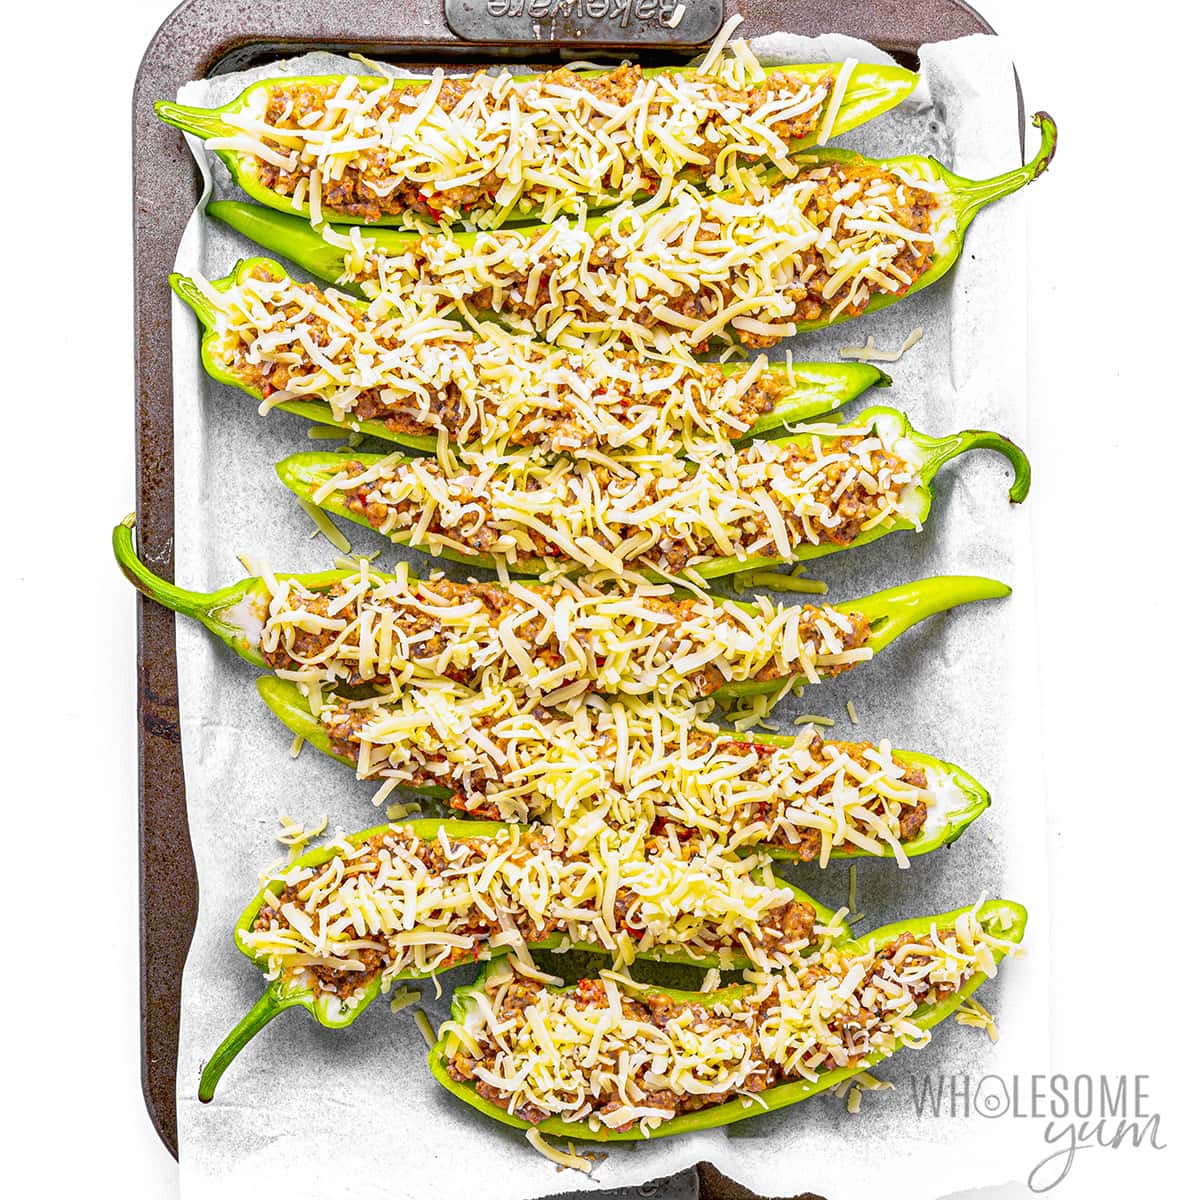 Sausage stuffed banana peppers topped with shredded cheese.